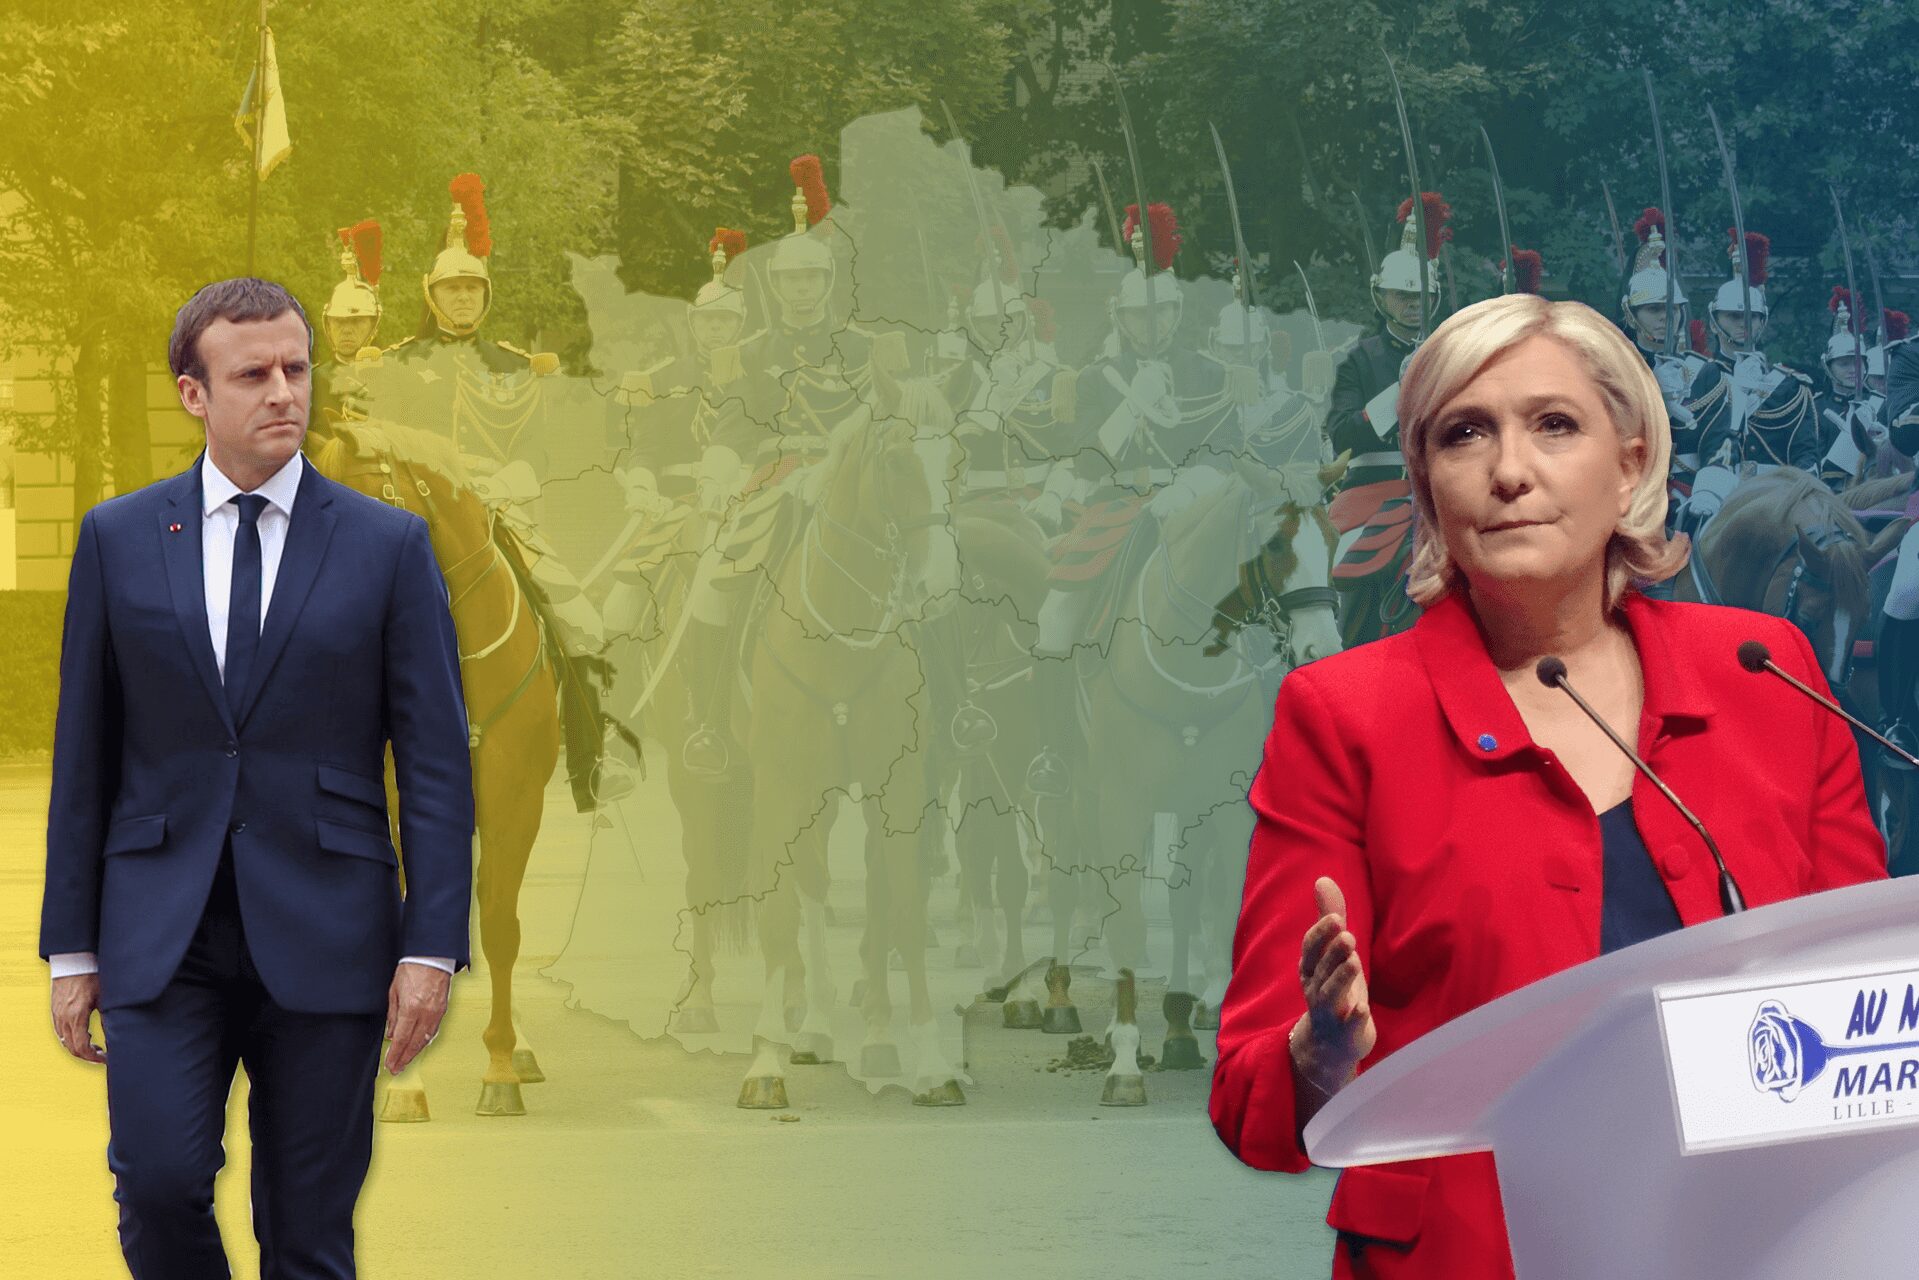 When the military joins the far right: Macron’s challenges ahead of the 2022 election